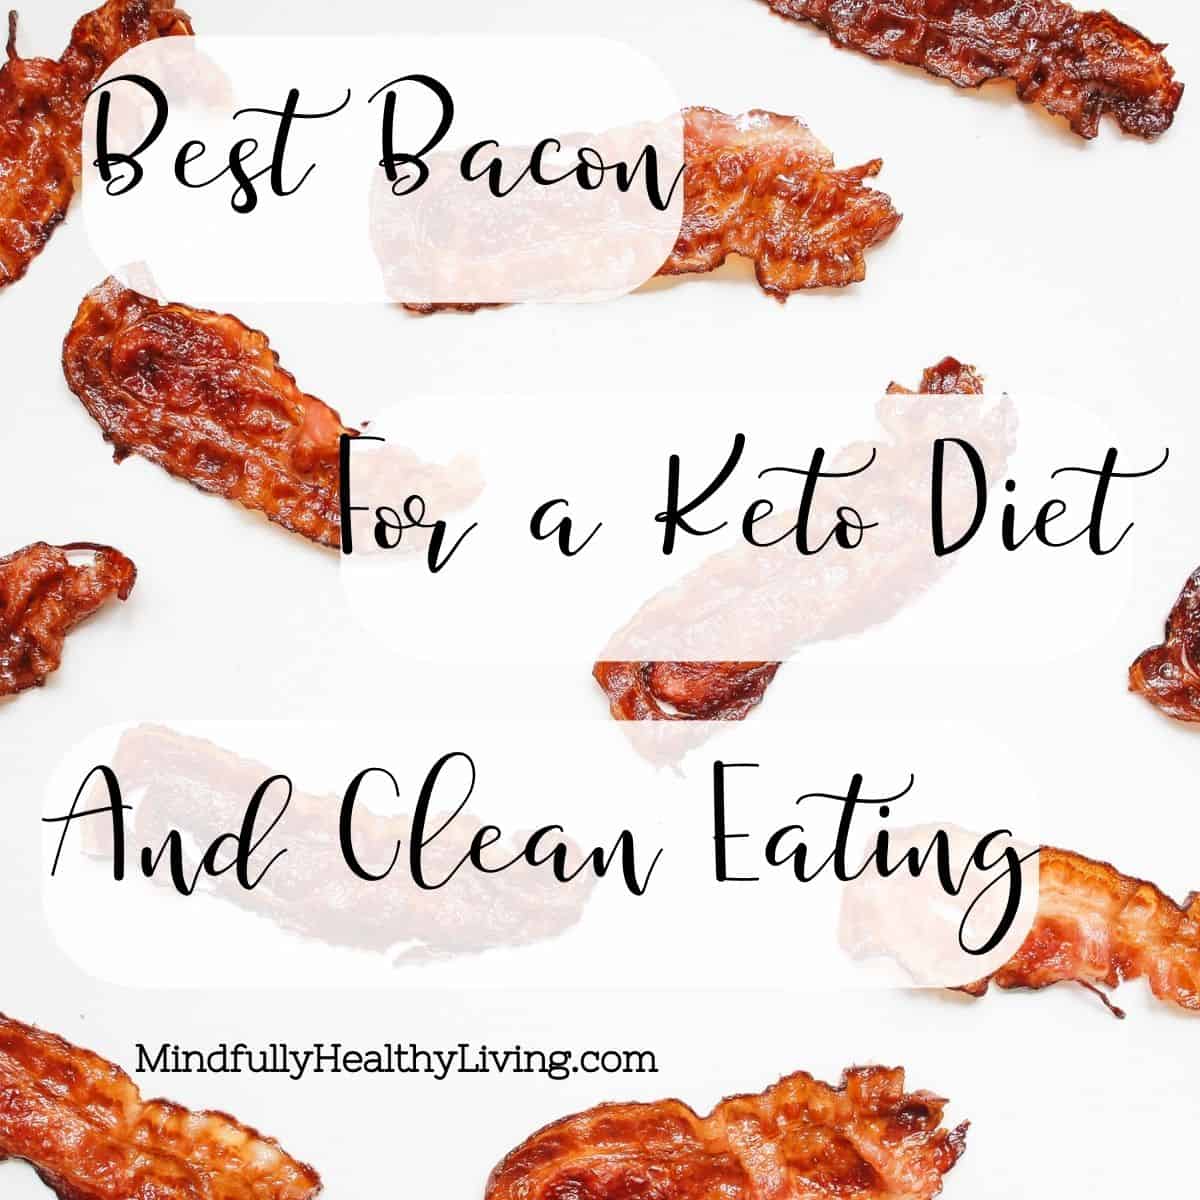 A white background with several cooked slices of bacon placed evenly throughout with a black text and white transparent background to the text. The text reads Best Bacon for a Keto Diet and Clean Eating Mindfullyhealthyliving.com